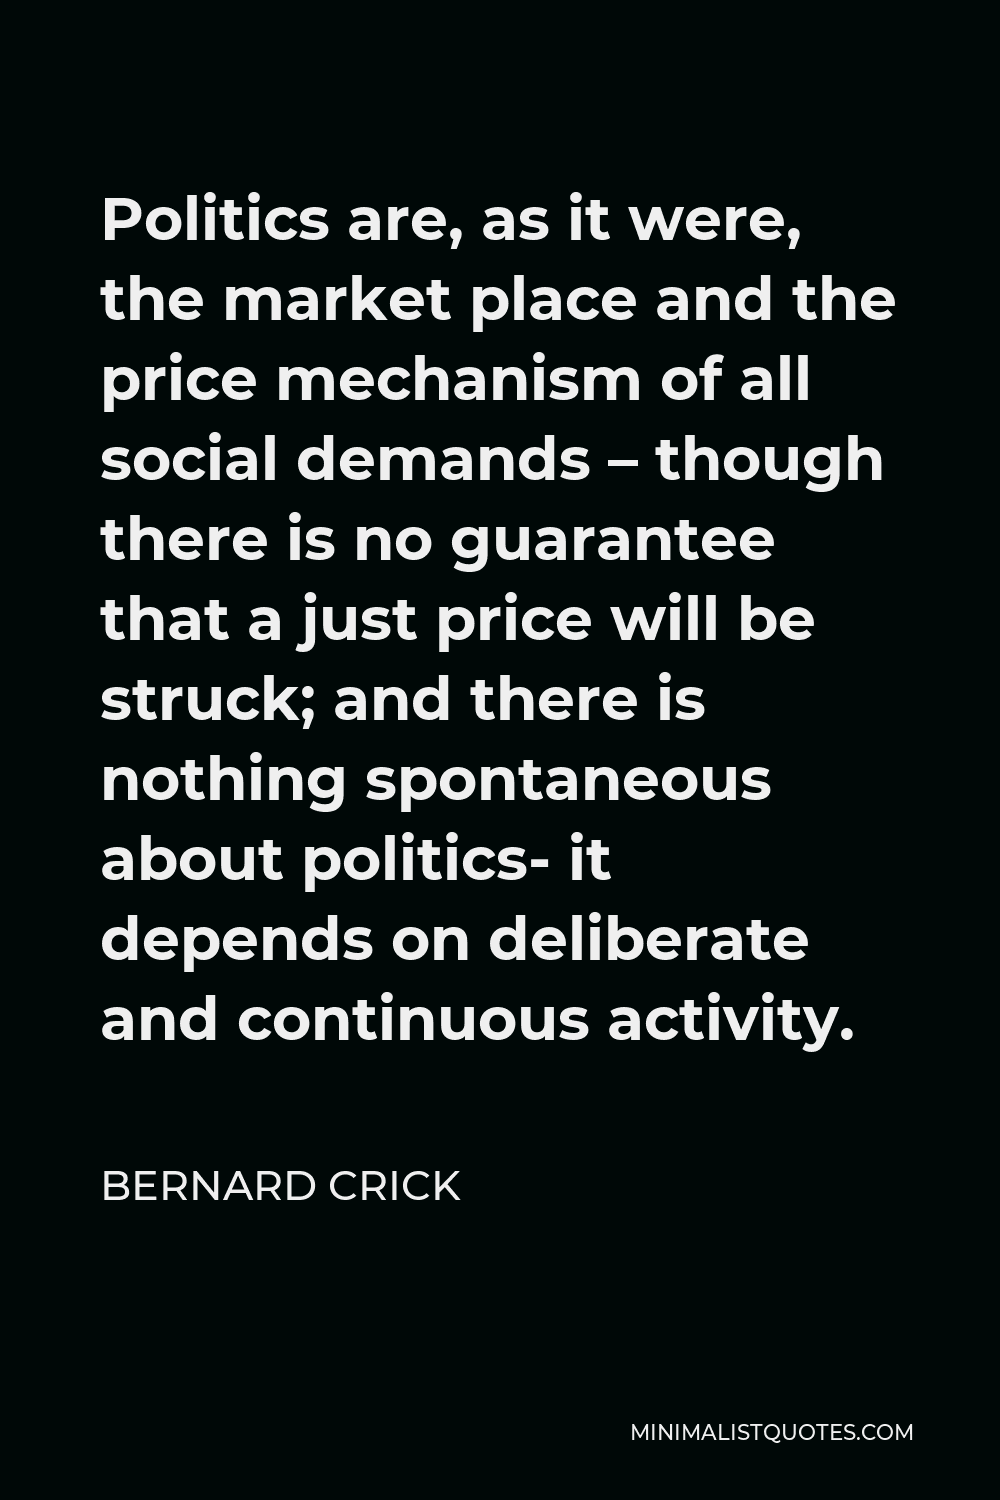 Bernard Crick Quote - Politics are, as it were, the market place and the price mechanism of all social demands – though there is no guarantee that a just price will be struck; and there is nothing spontaneous about politics- it depends on deliberate and continuous activity.